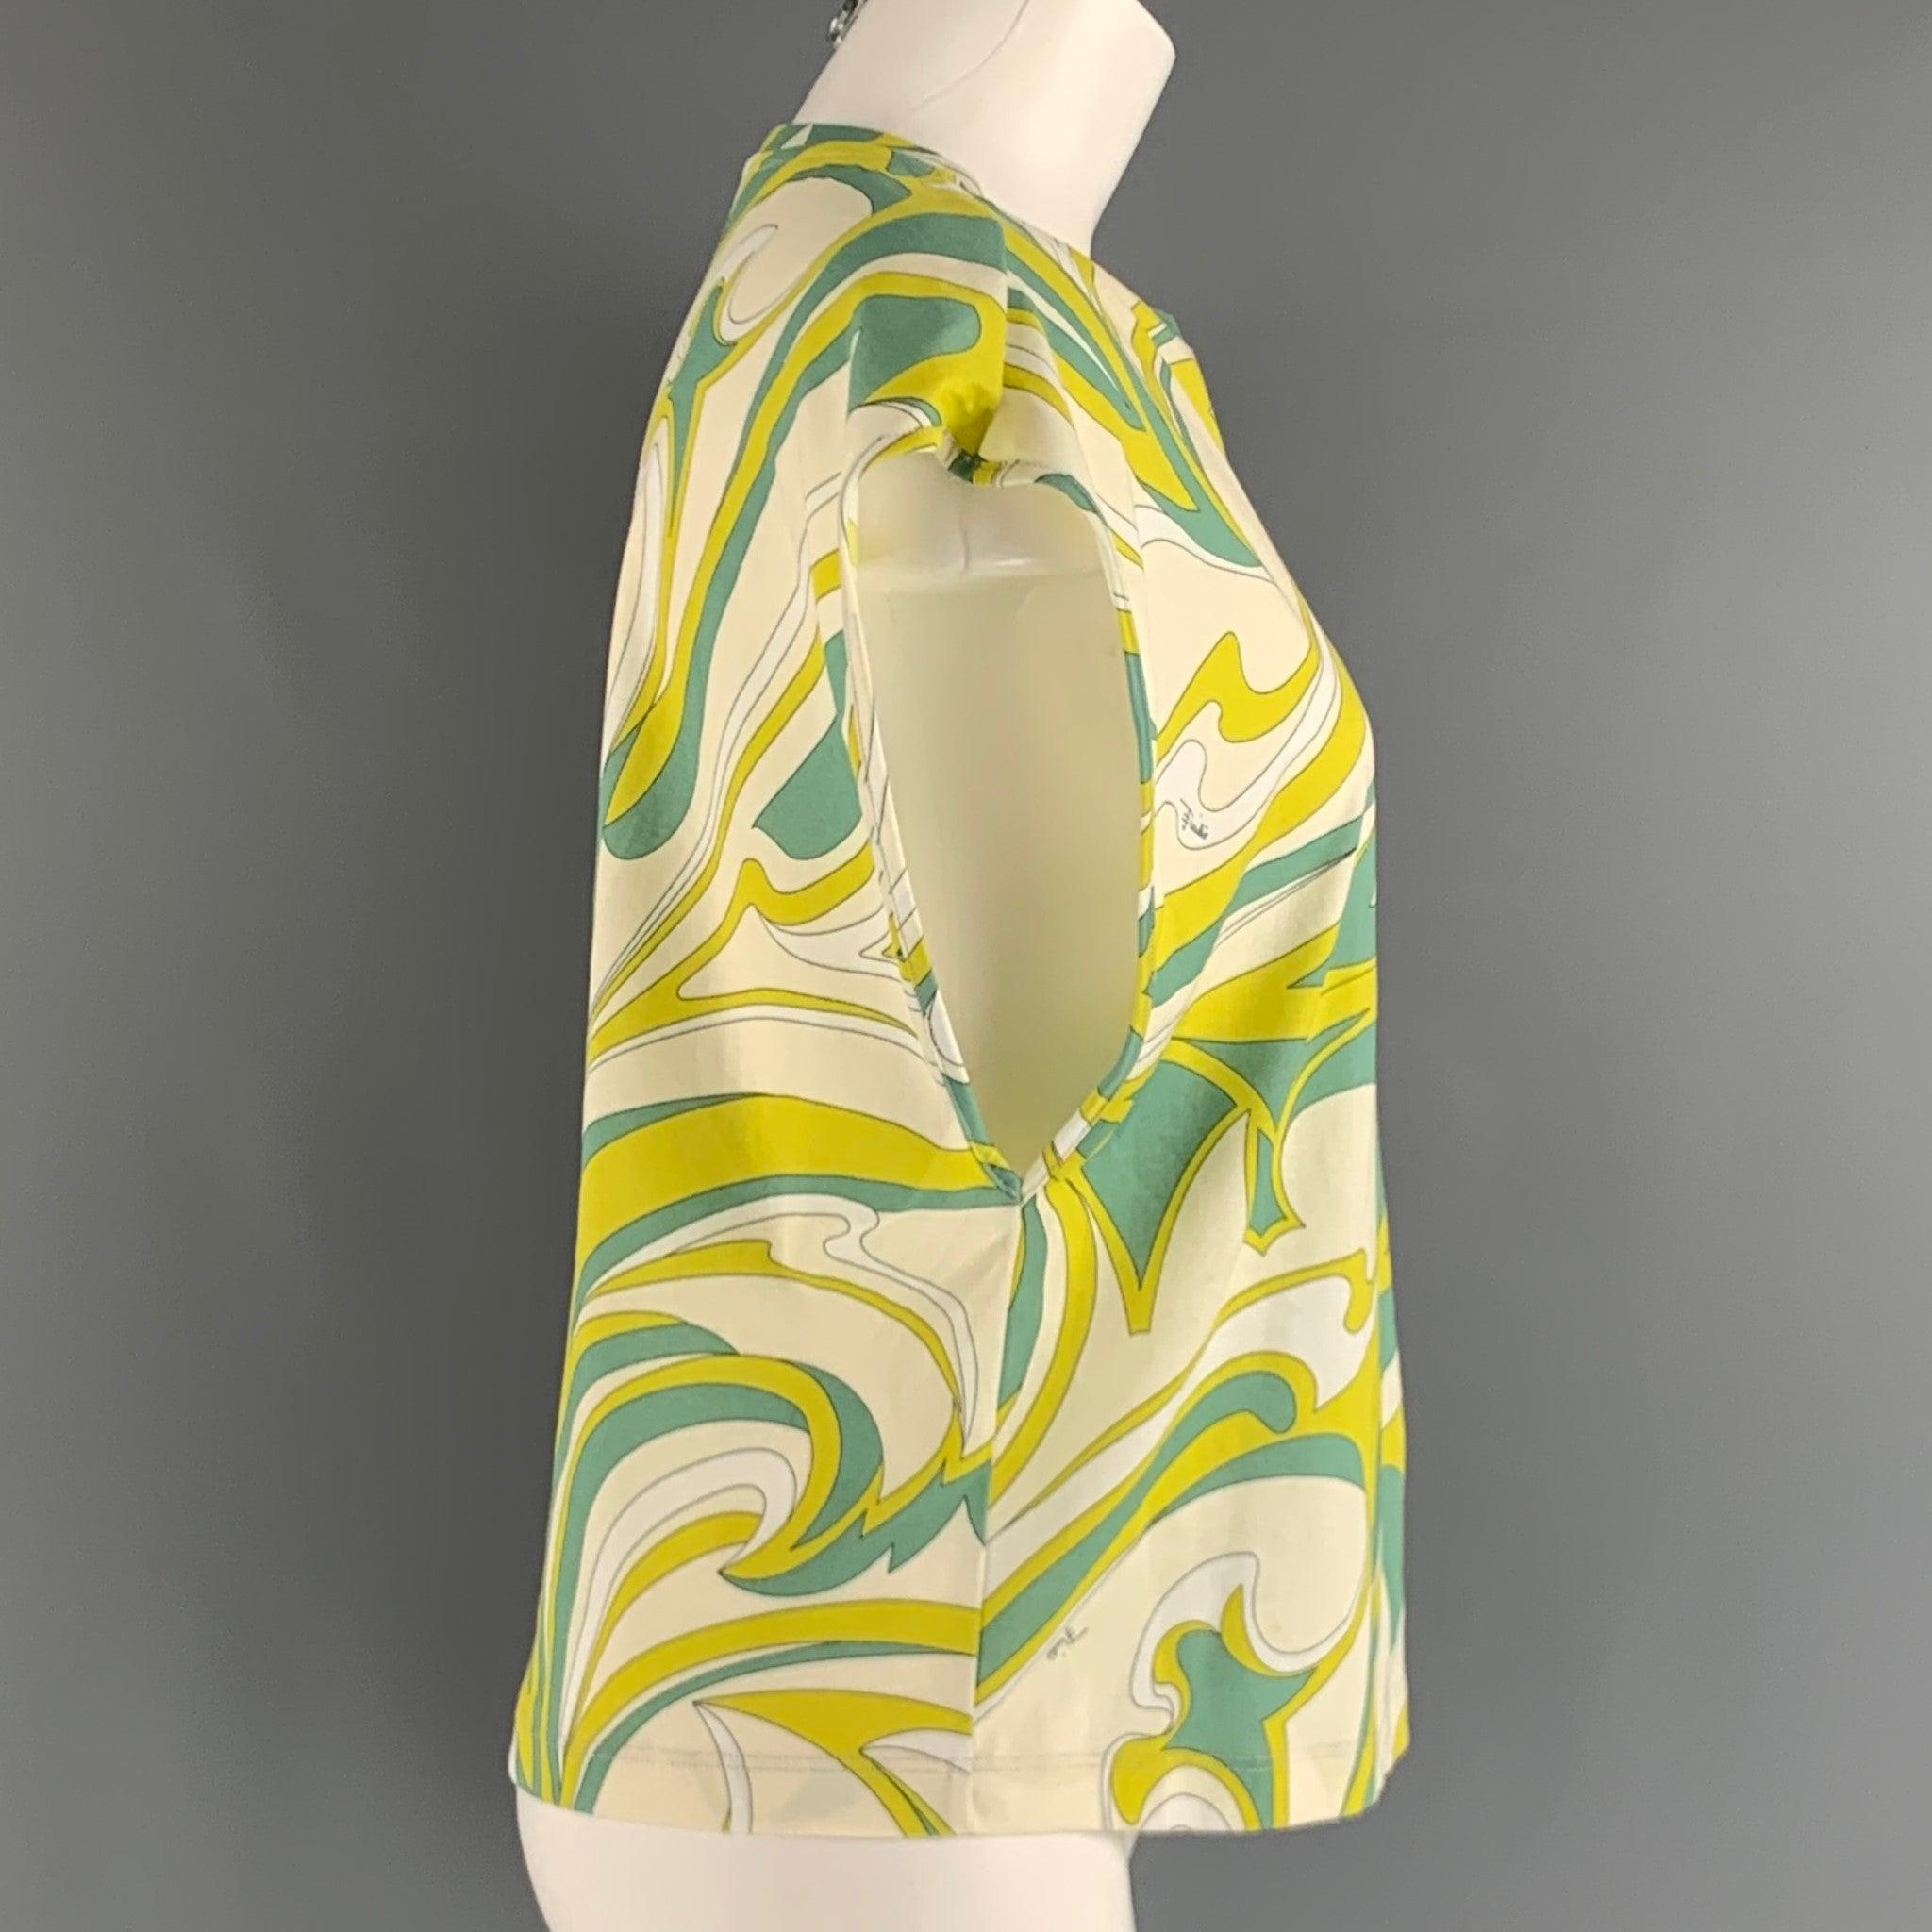 EMILIO PUCCI boxy casual top comes in a cream, green an yellow abstract print cotton blend knit material featuring a crew-neck. Made in Italy.Excellent Pre-Owned Condition. 

Marked:   S 

Measurements: 
 
Shoulder: 16.5 inches Chest: 40 inches